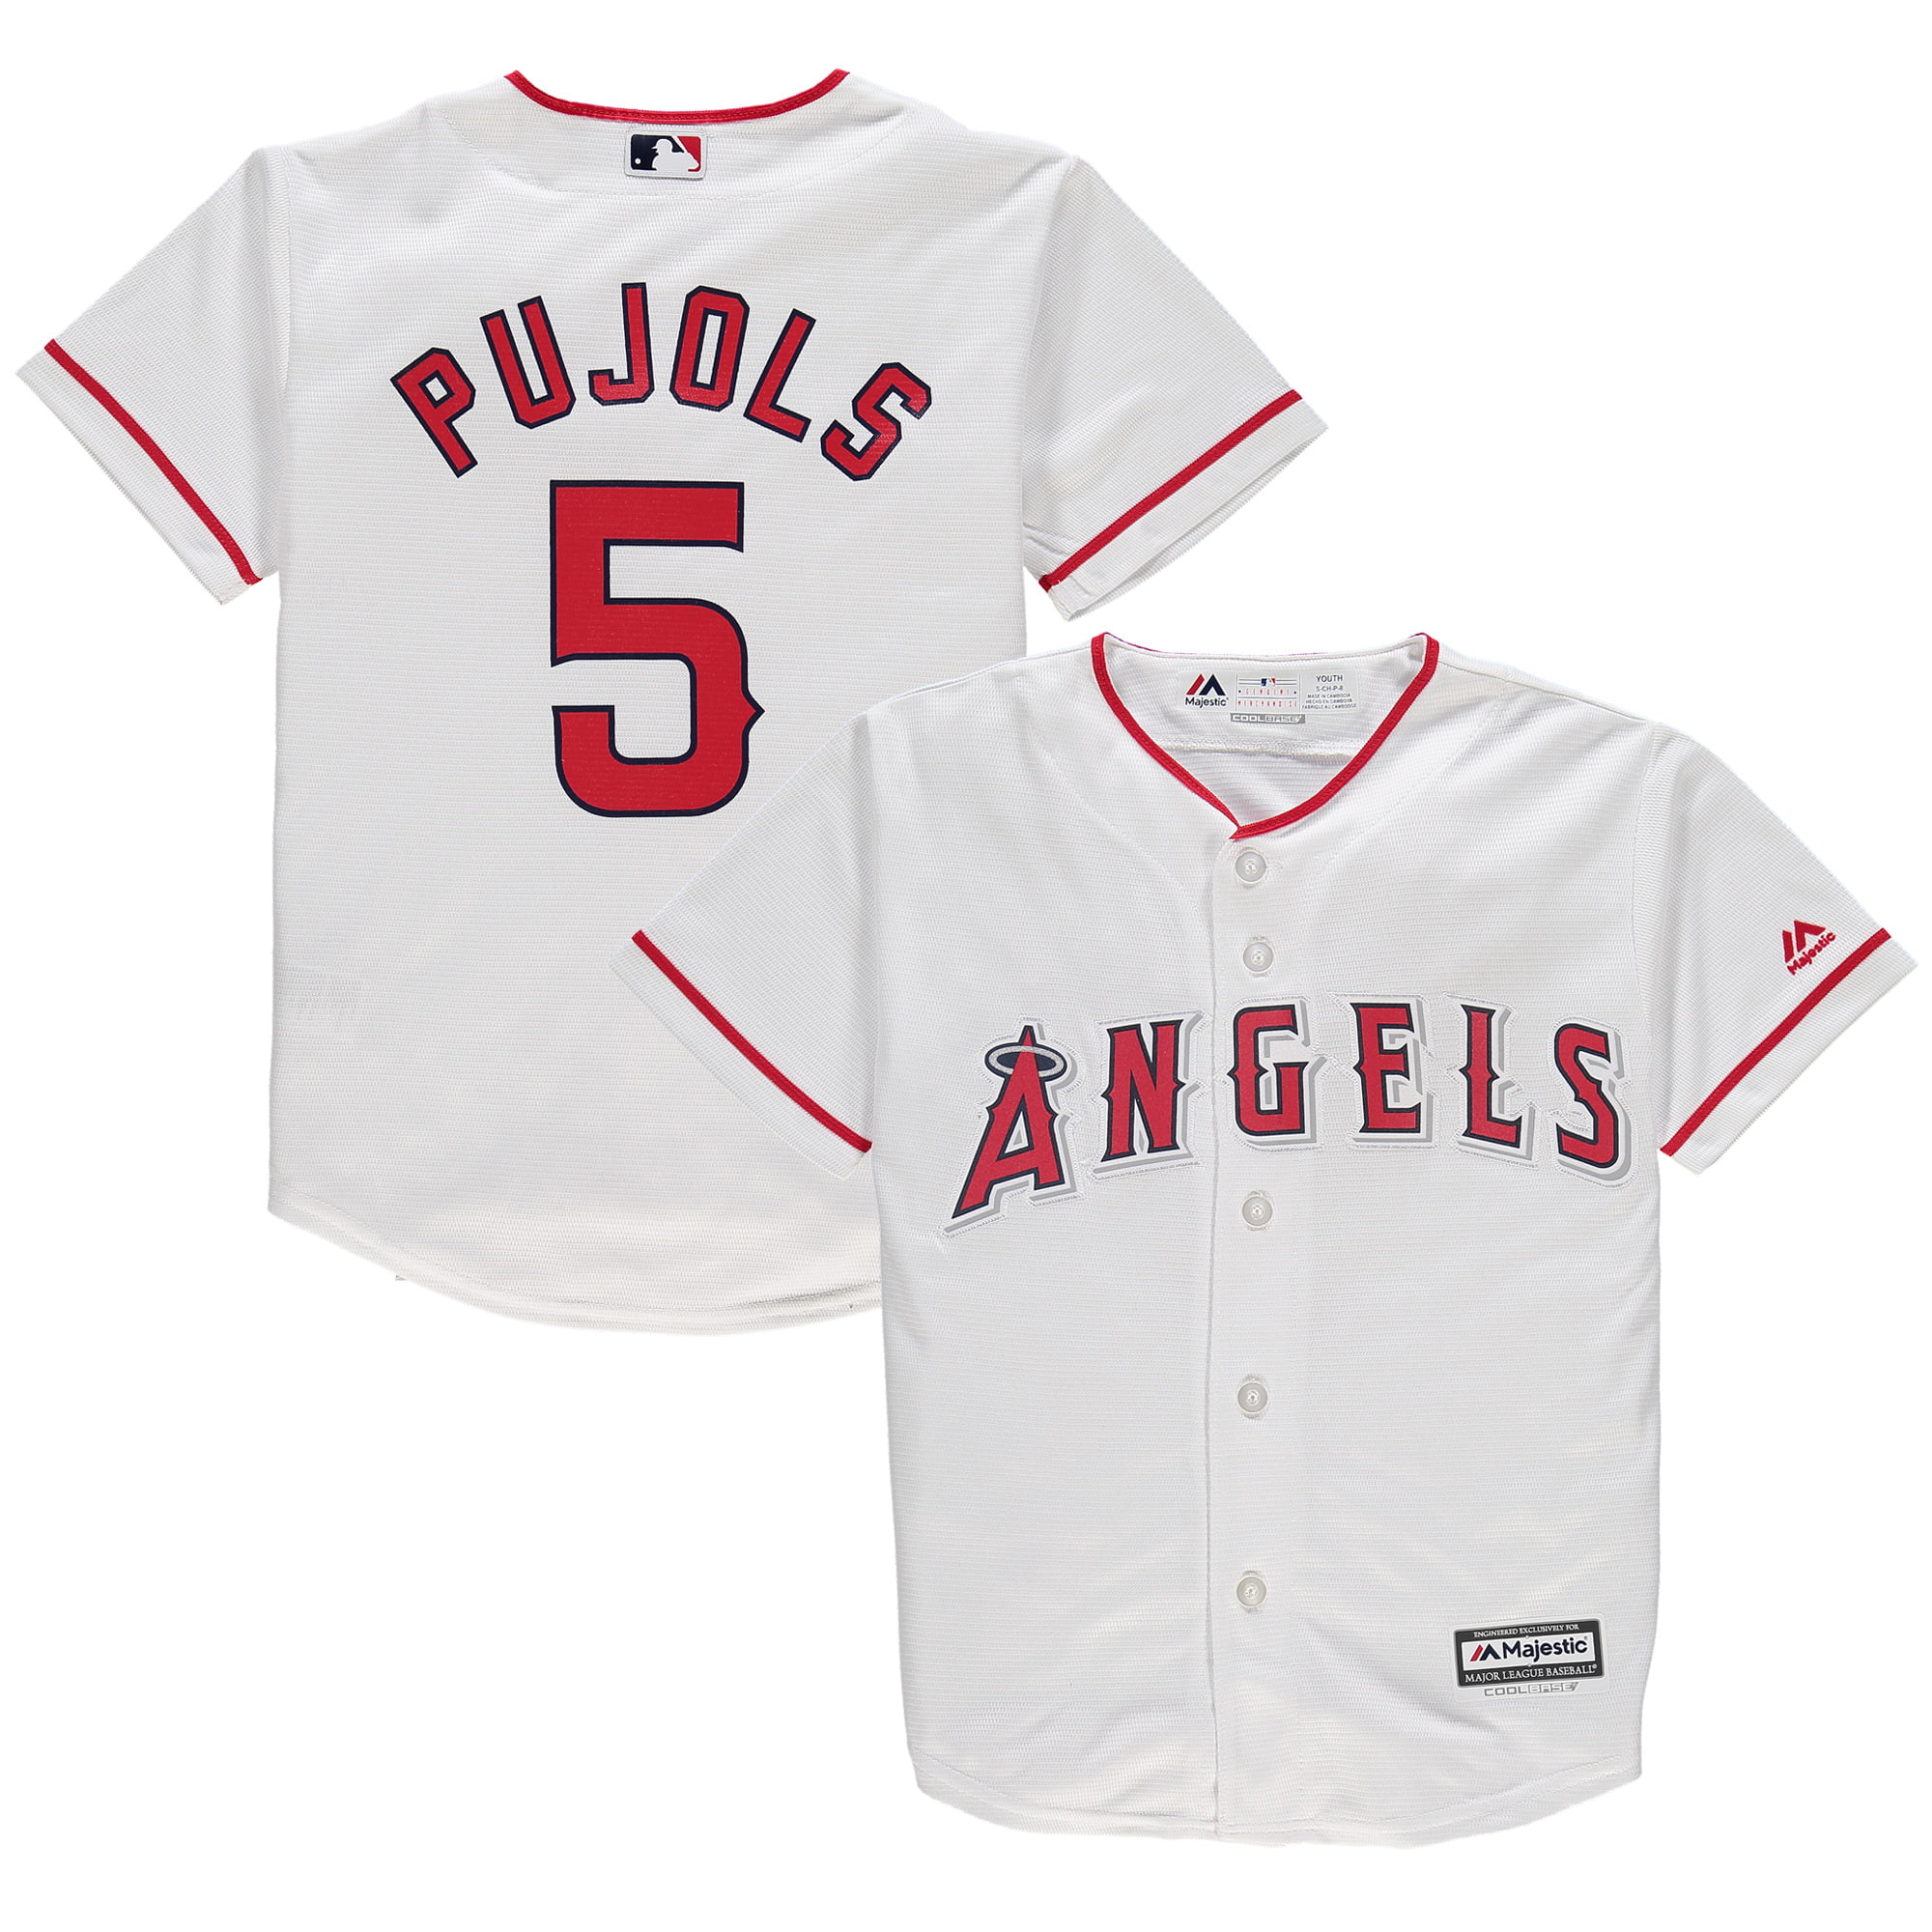 pujols youth jersey